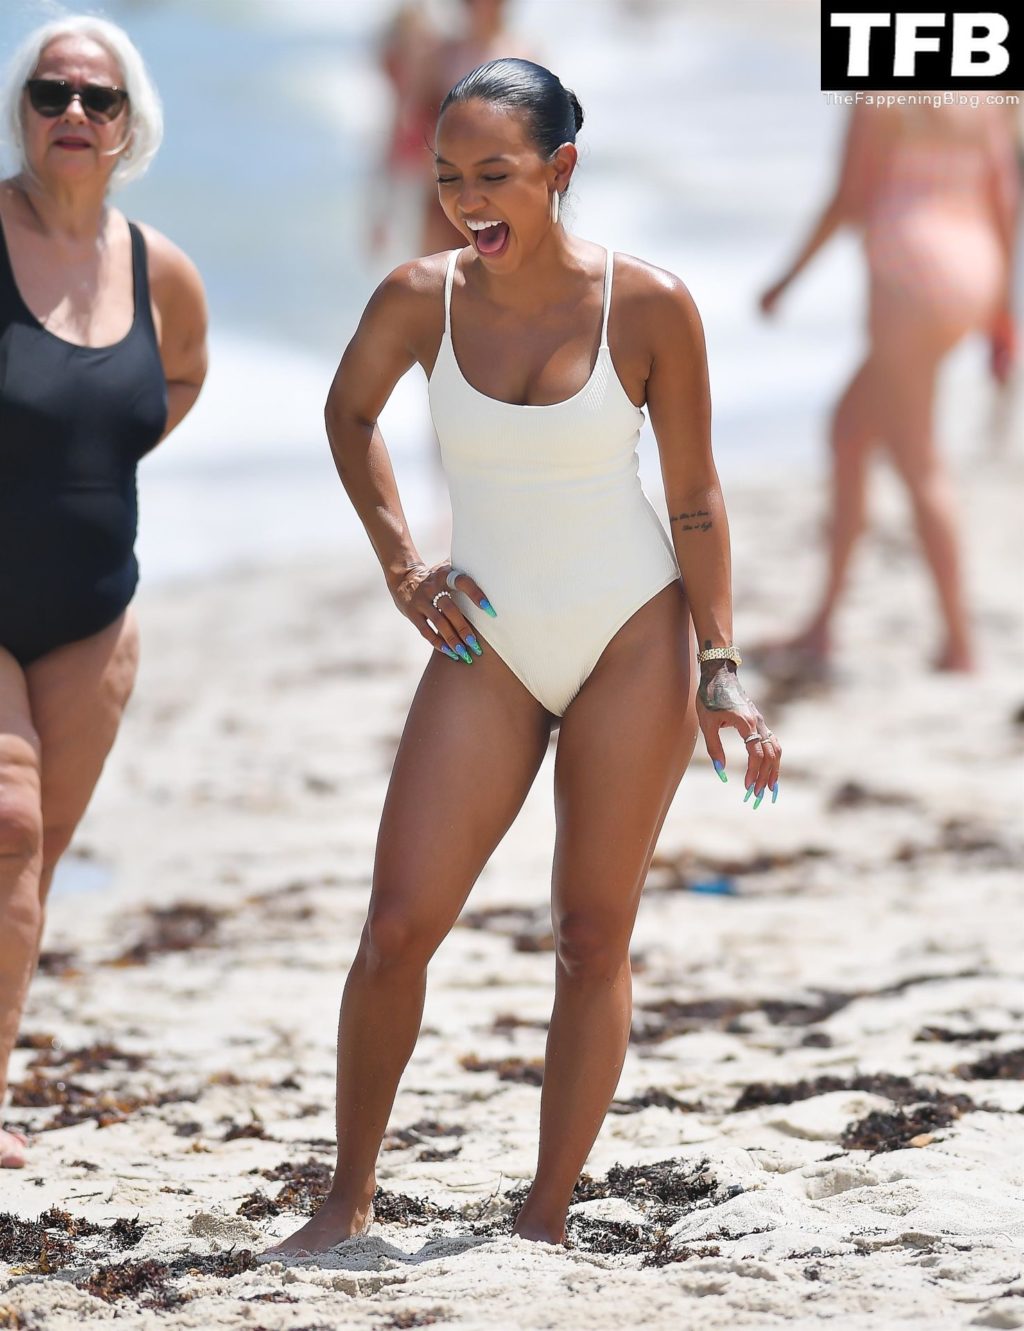 Karrueche Tran Sexy The Fappening Blog 9 1024x1331 - Karrueche Tran Looks Incredible in a White Swimsuit on the Beach in Miami (45 Photos)